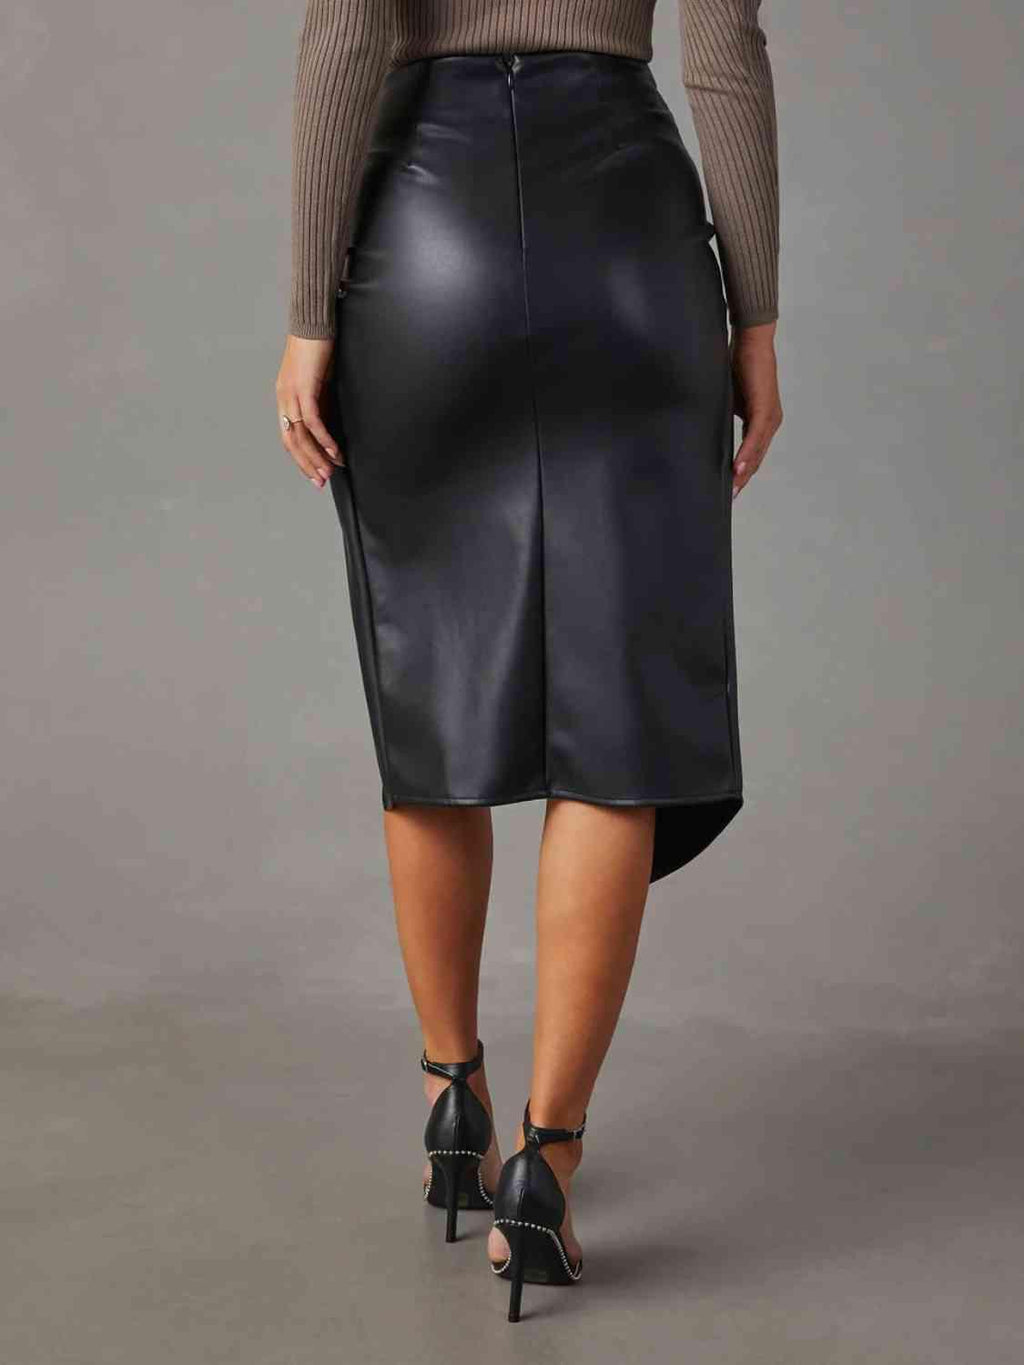 Twist Detail High Waist Skirt-Skirt-C@X@Y, Ship From Overseas, Skirt-Black-S-[option4]-[option5]-[option6]-Womens-USA-Clothing-Boutique-Shop-Online-Clothes Minded